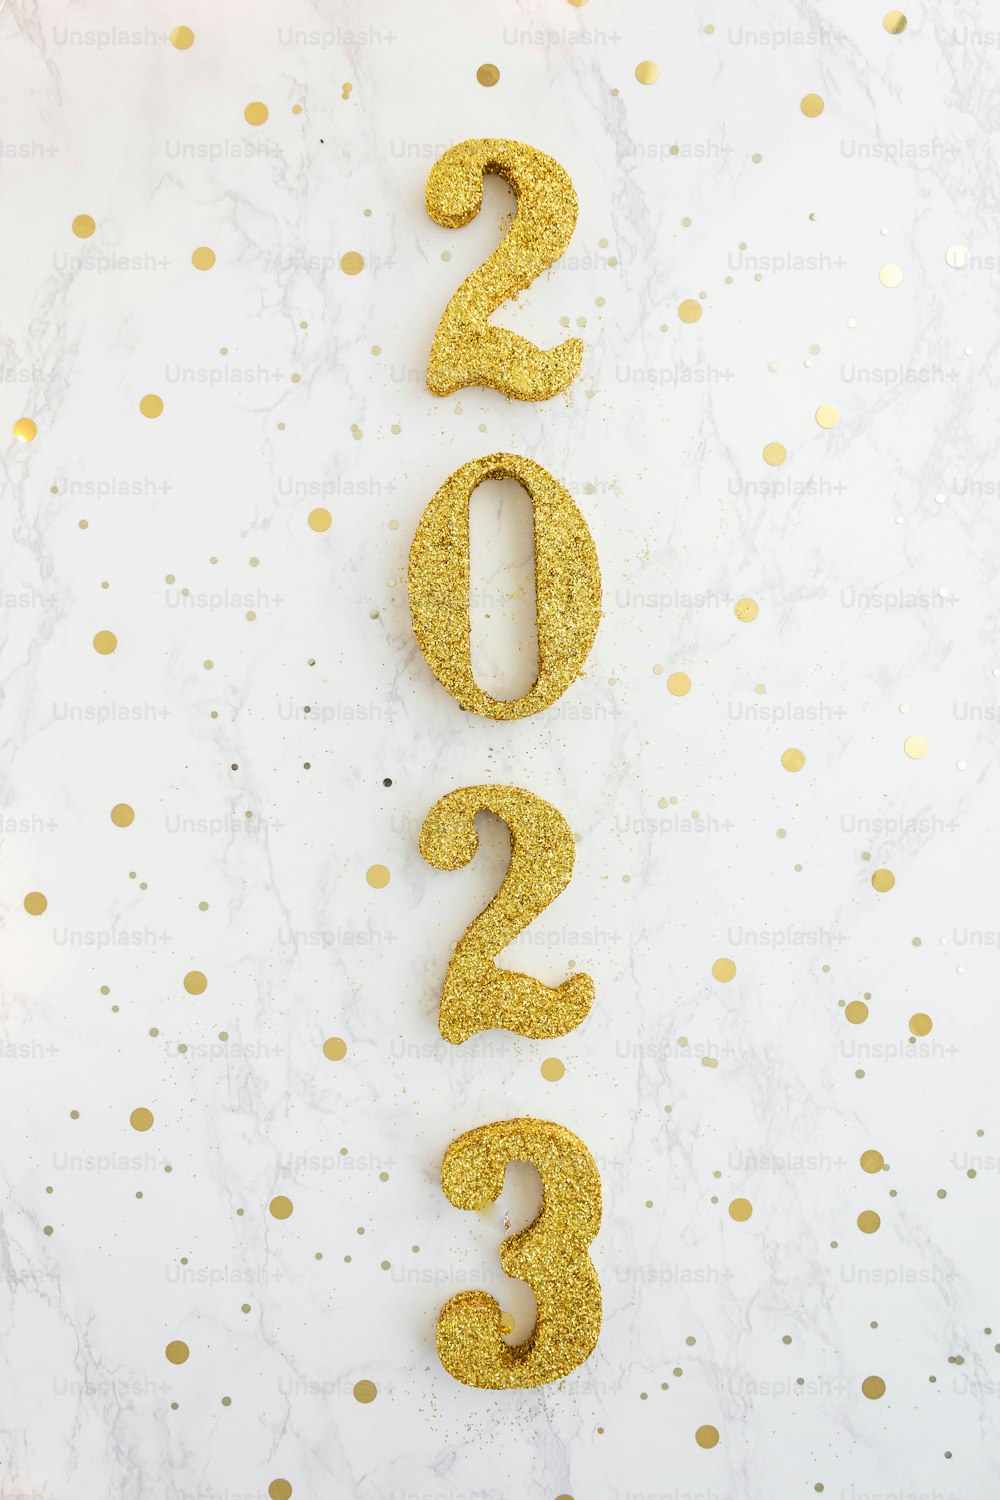 the numbers are spelled out in gold glitter